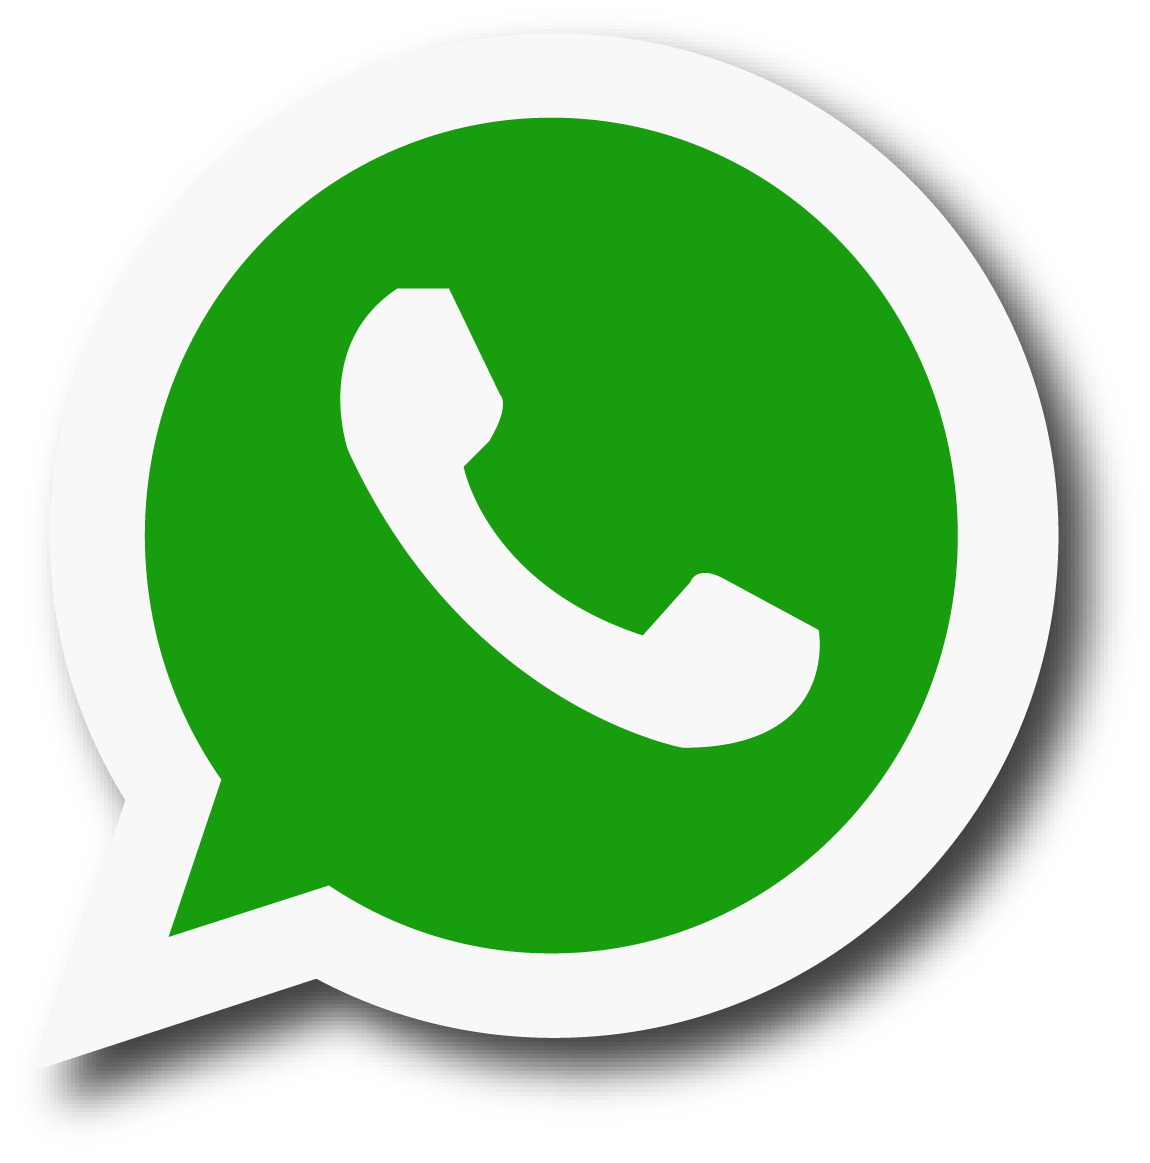 whats app for Bios password